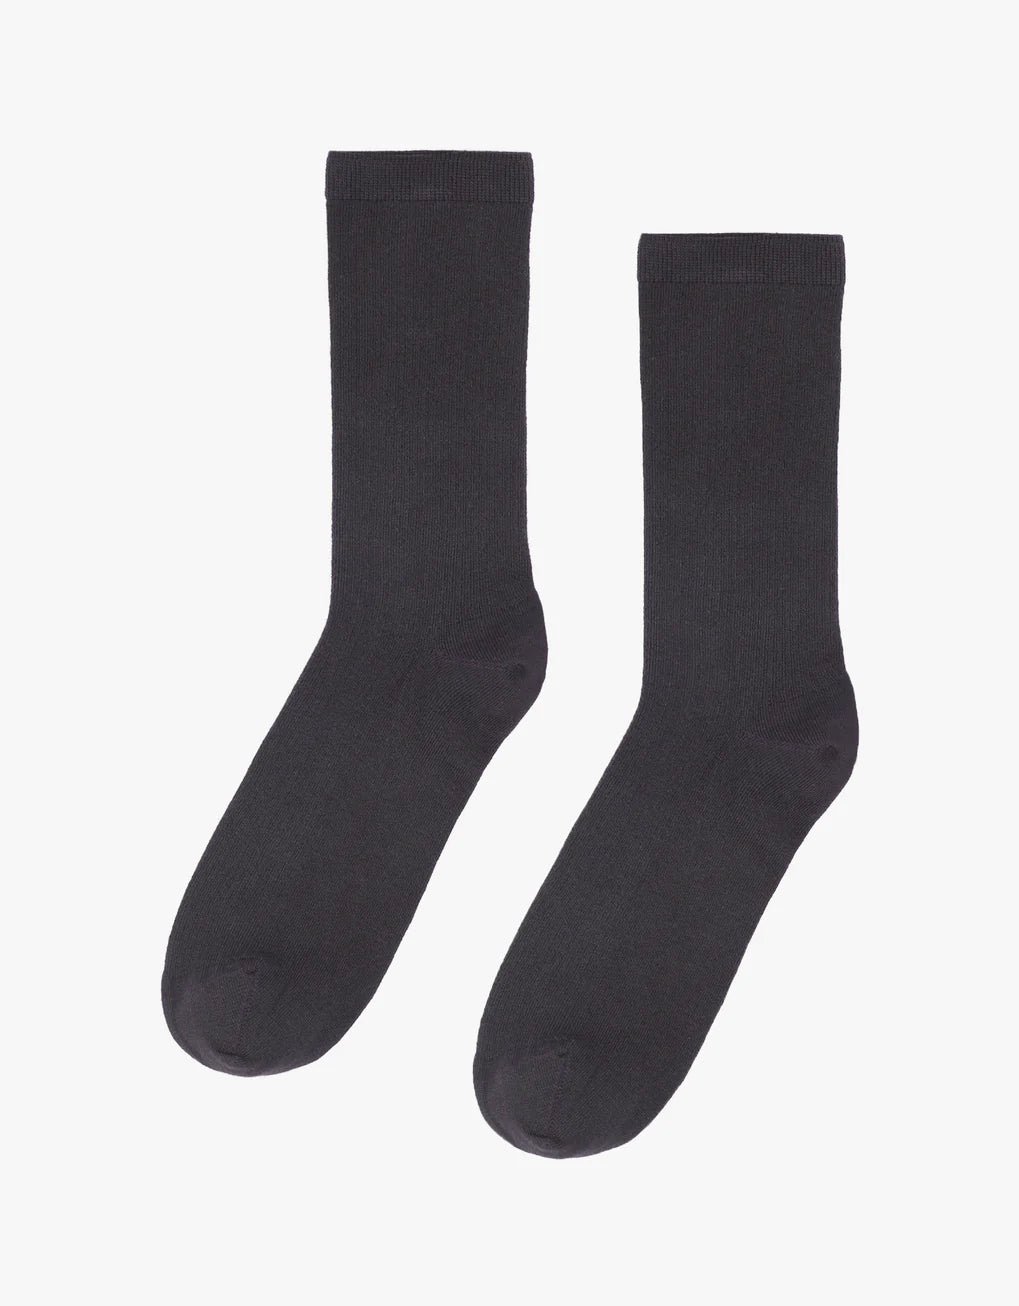 A pair of Colorful Standard Classic Organic Socks made from organic cotton on a white background.